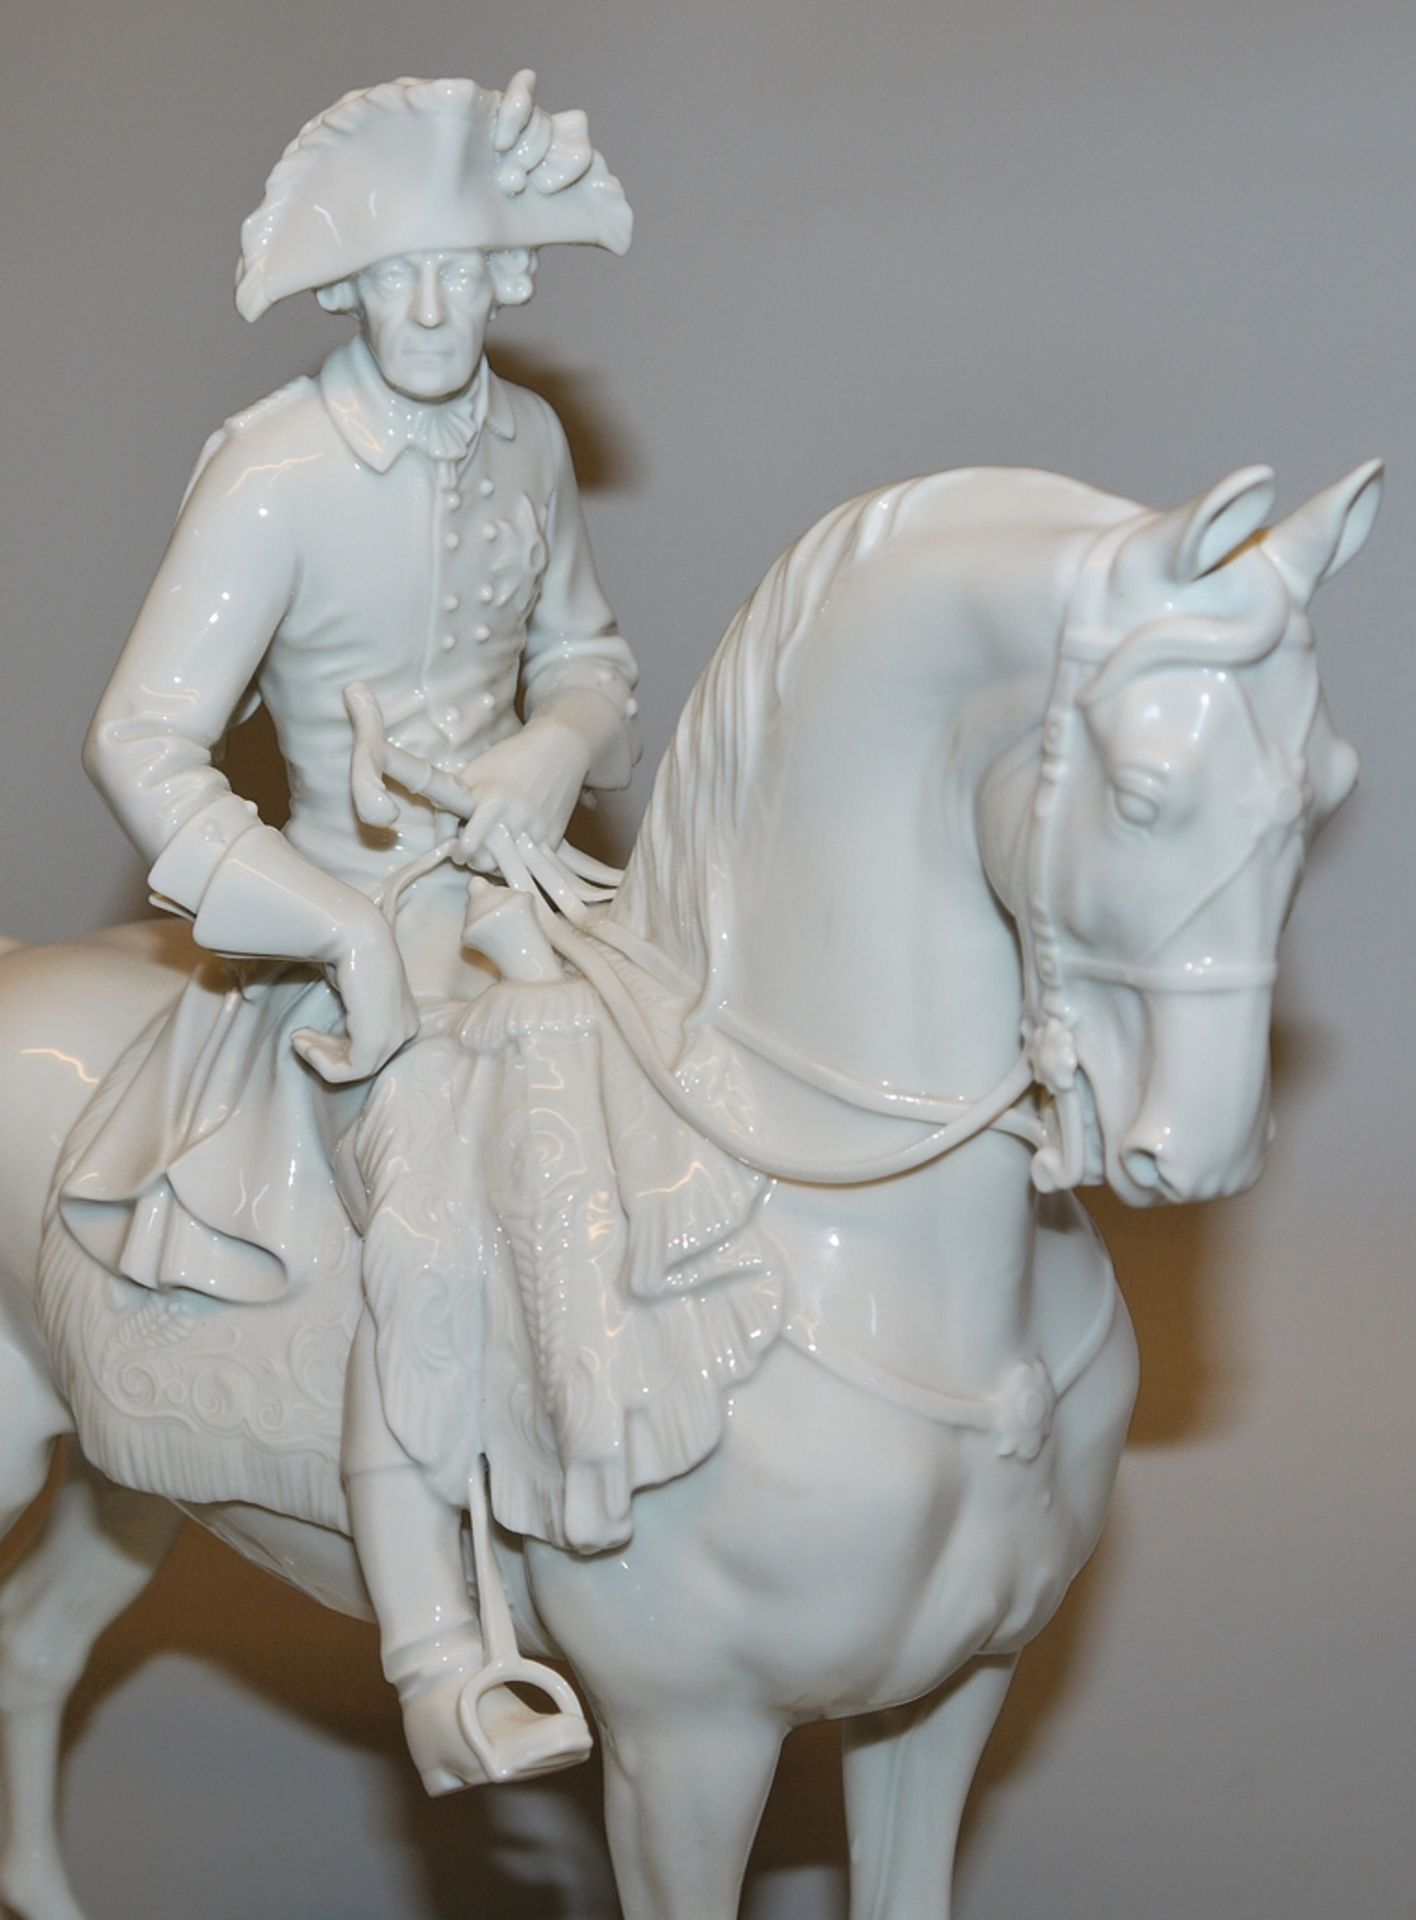 Theodor Kärner, Frederick the Great on Horseback, porcelain manufactory Allach circa 1938/40 - Image 2 of 4